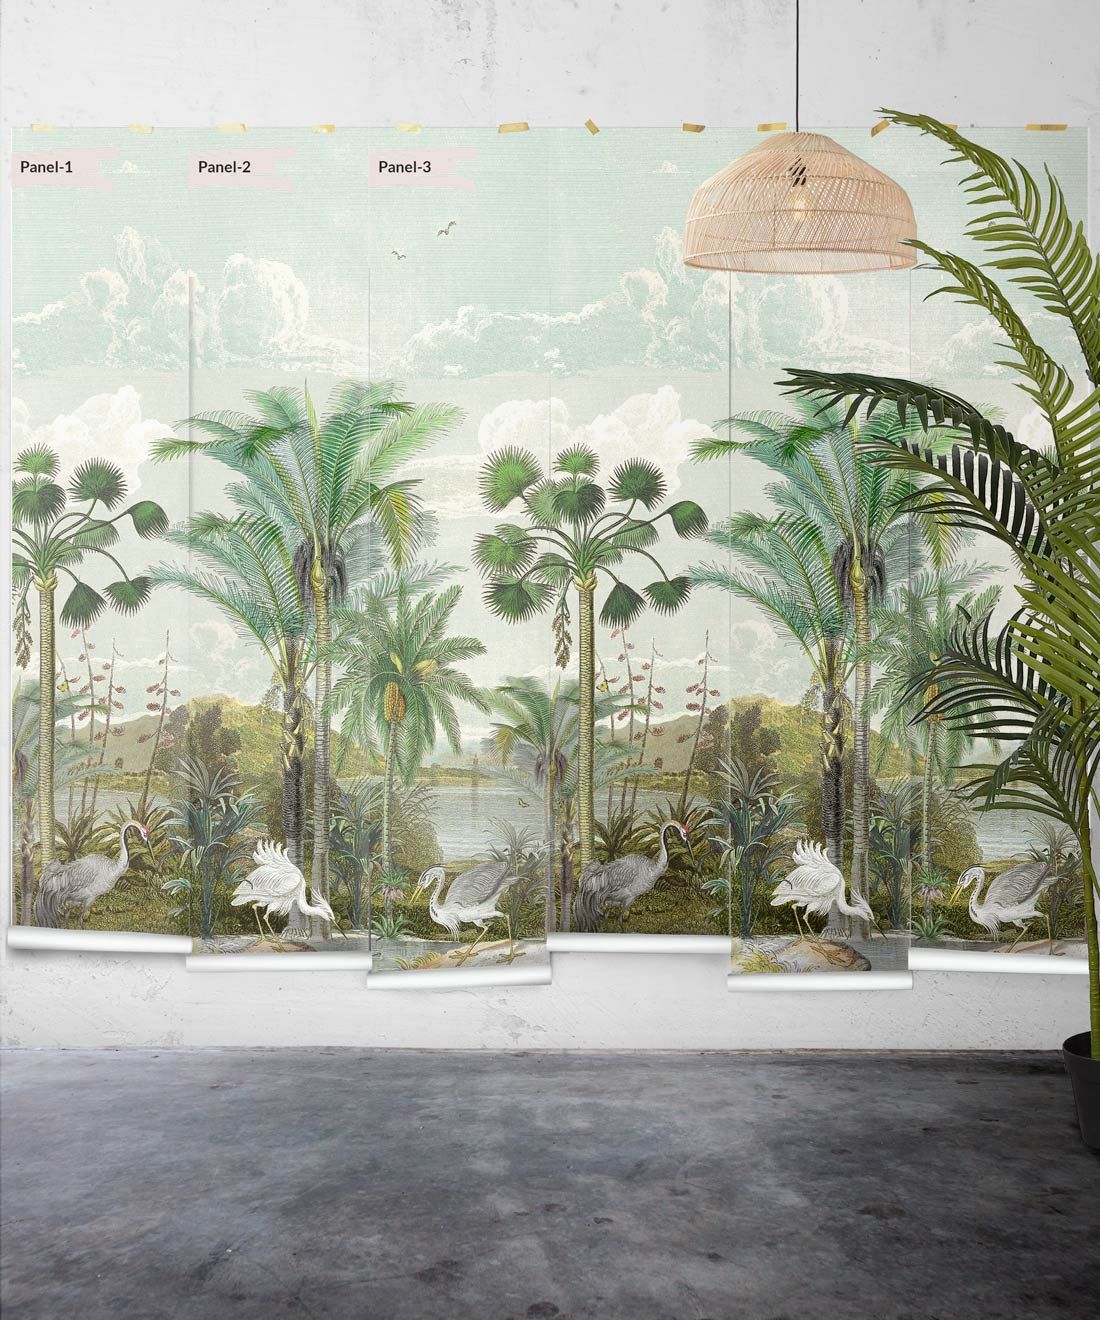 South Asian Subcontinent Wallpaper Mural •Bethany Linz • Palm Tree Mural • Blue • Panels